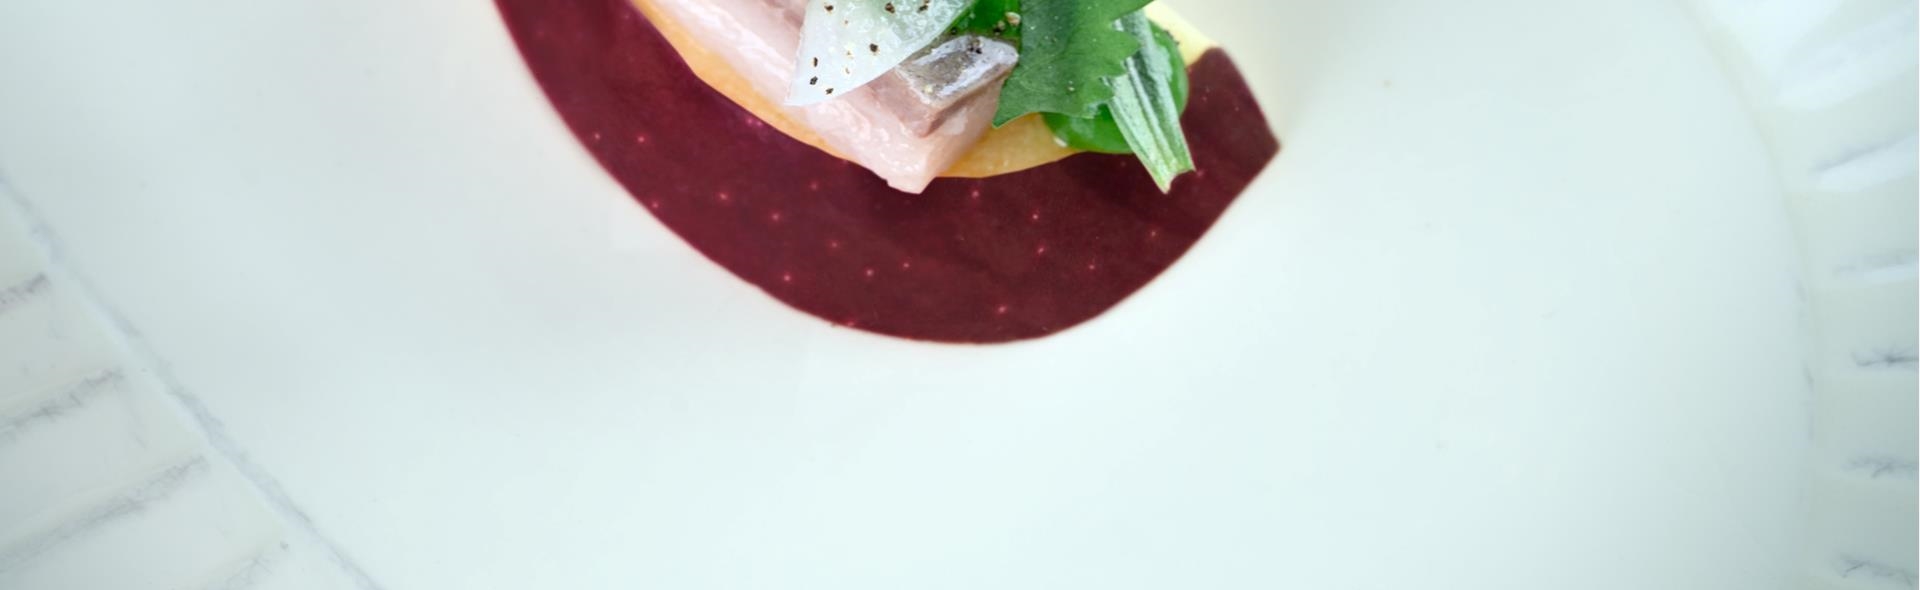 rezept-basile-dewulf-marlene-red-delicious-apple-carpaccio-pickled-herring-herb-mayonnaise-1-ret-b